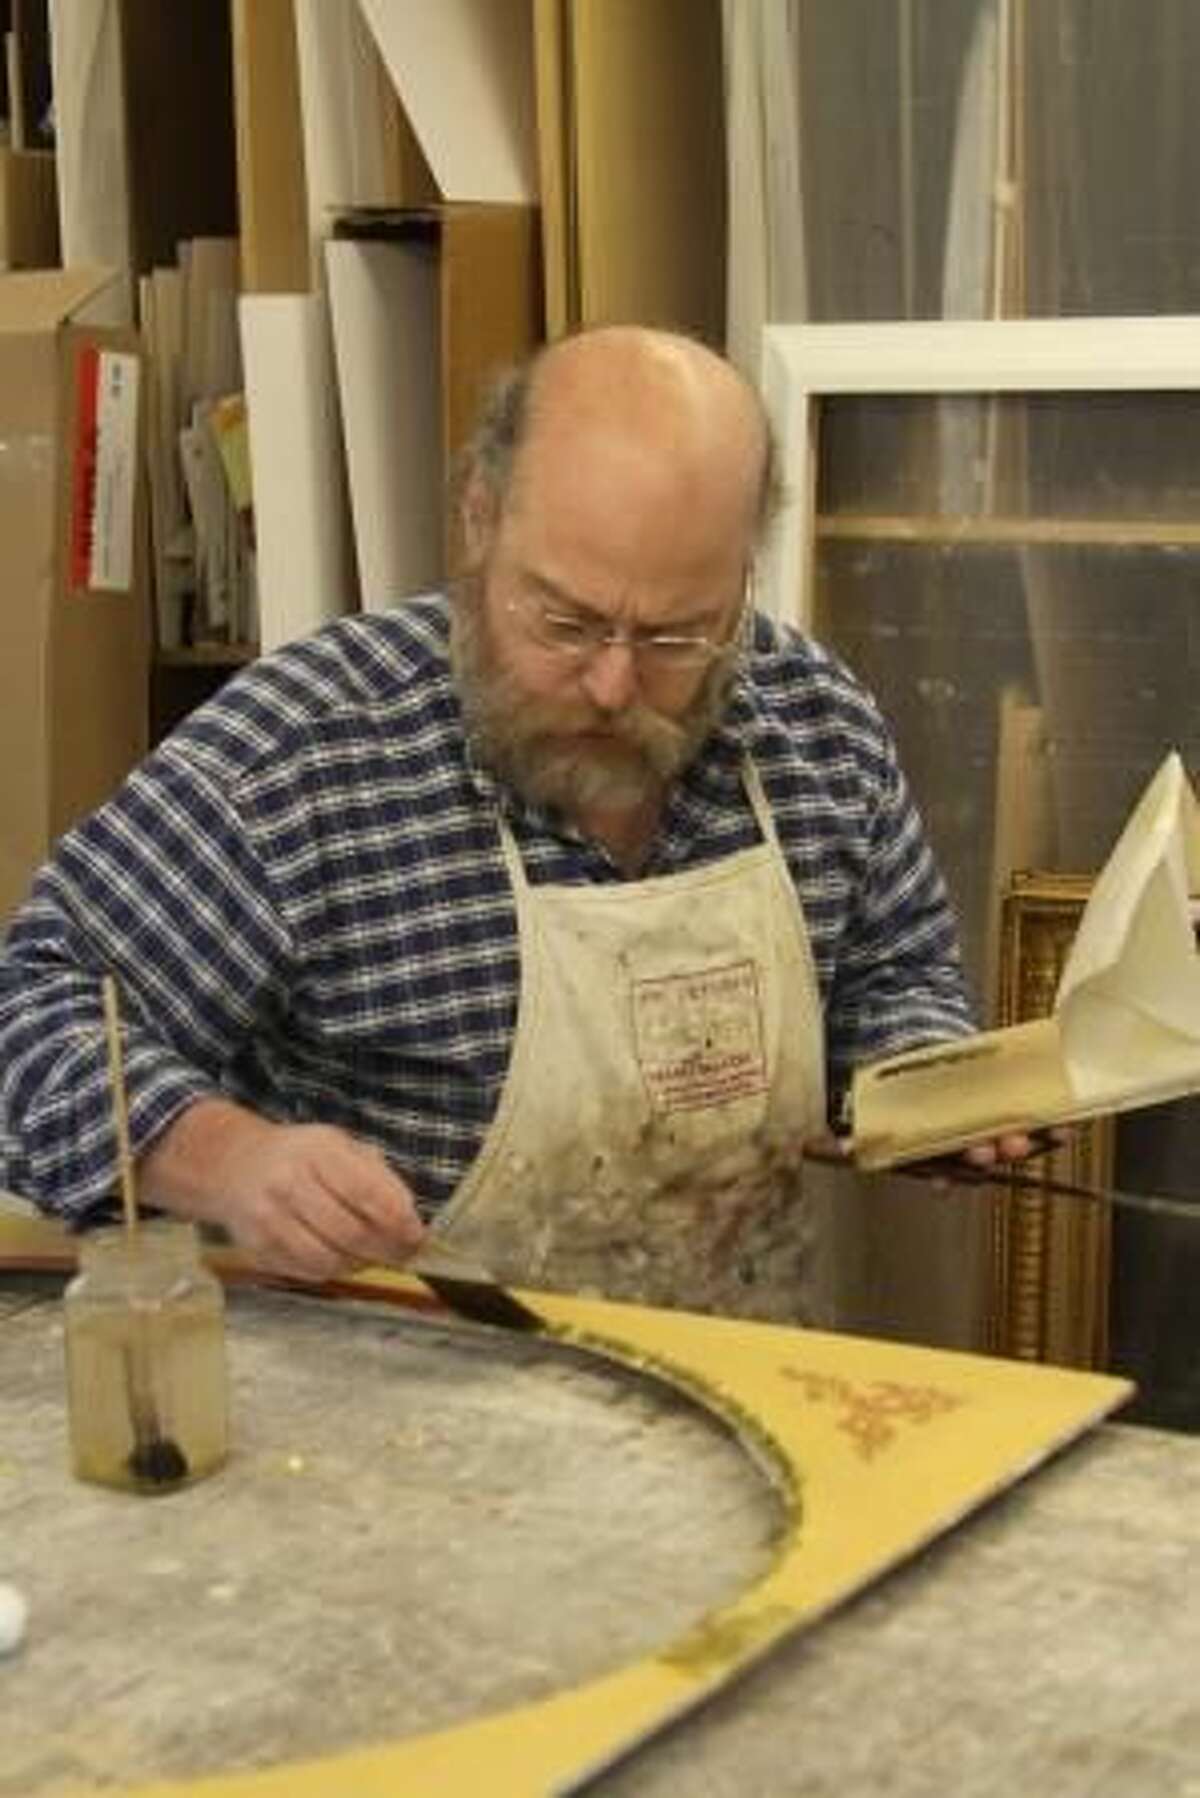 Artisan frame maker Peter Miller in his Woodbury studio. Photo by Kathryn Boughton/The Litchfield County Times.